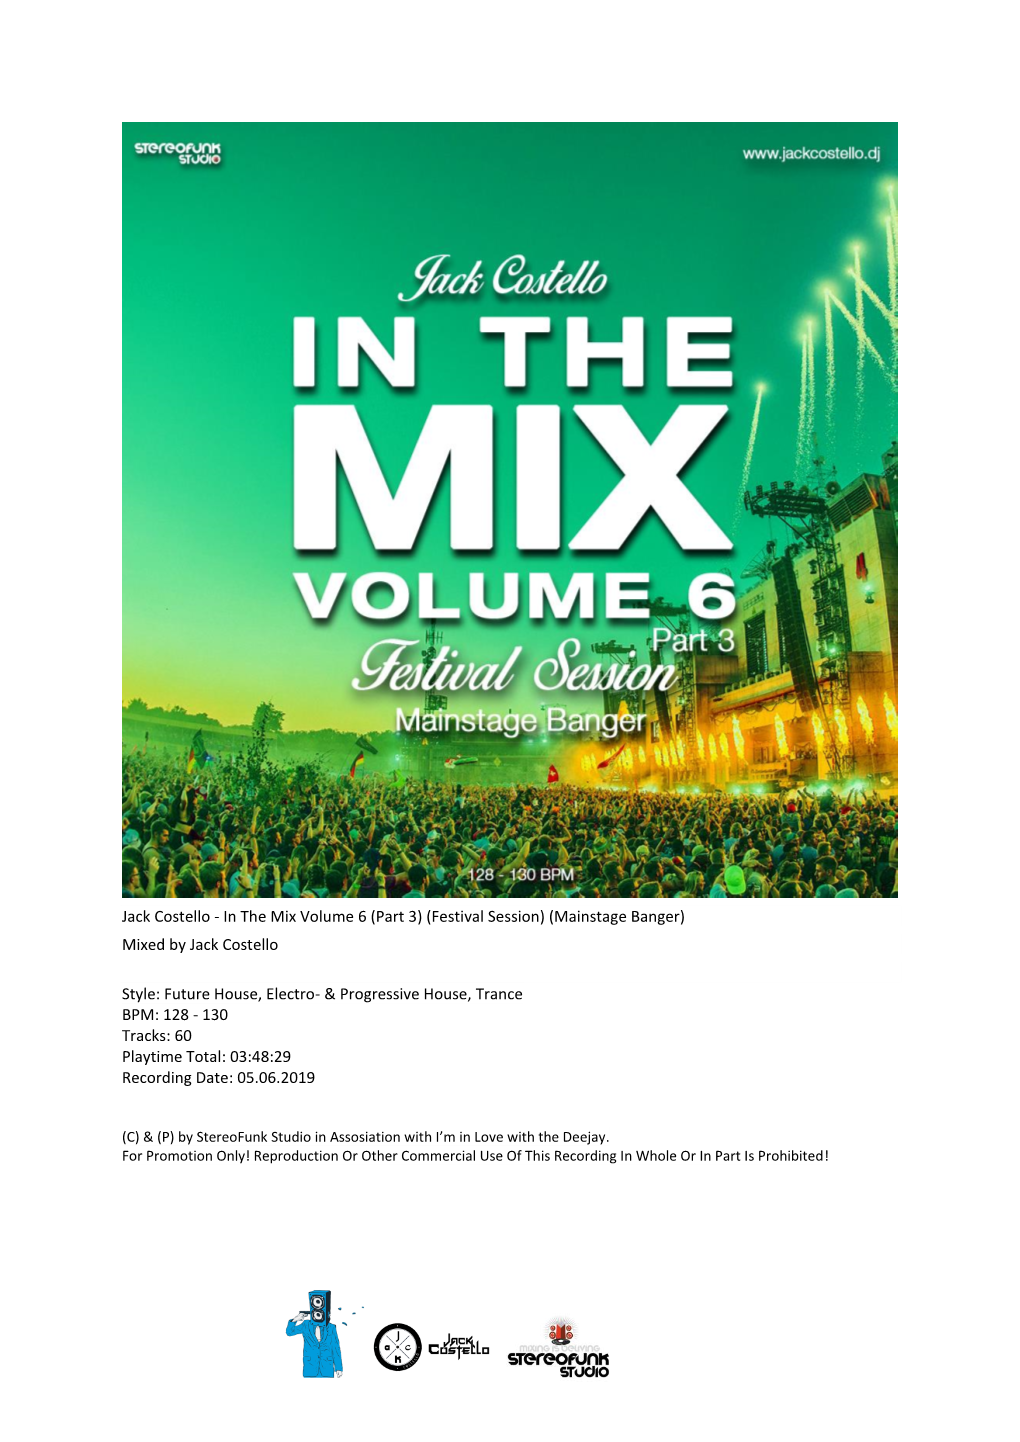 Jack Costello - in the Mix Volume 6 (Part 3) (Festival Session) (Mainstage Banger) Mixed by Jack Costello